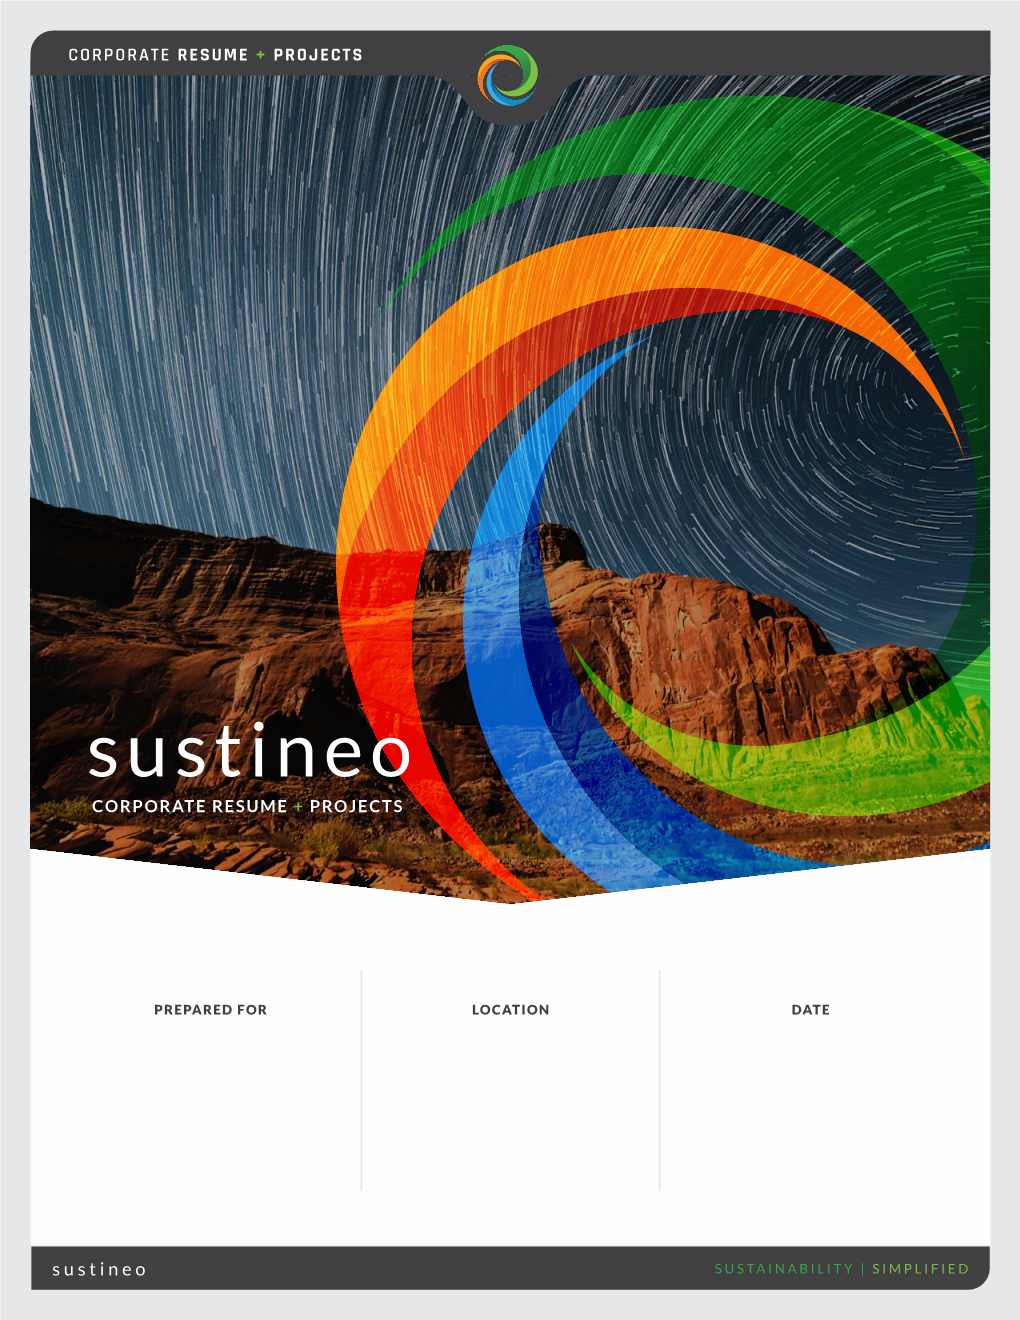 Sustineo Corporatesust�In��I�It� RESUME +Simpliﬁed PROJECTS